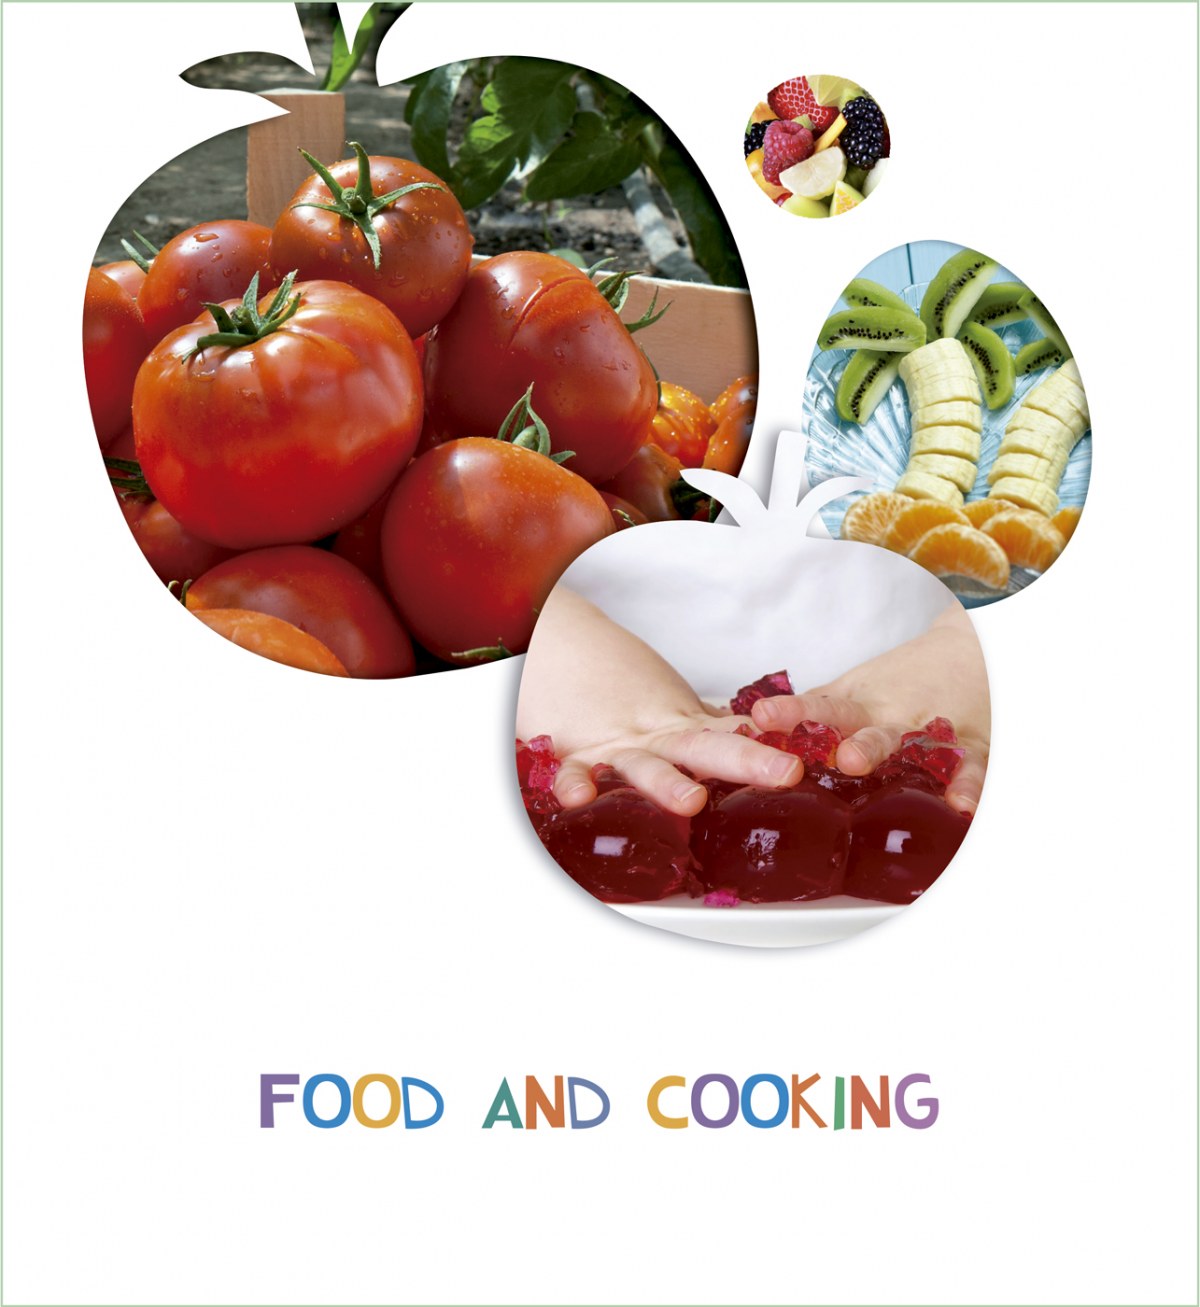 Food and cooking 5 years 2018